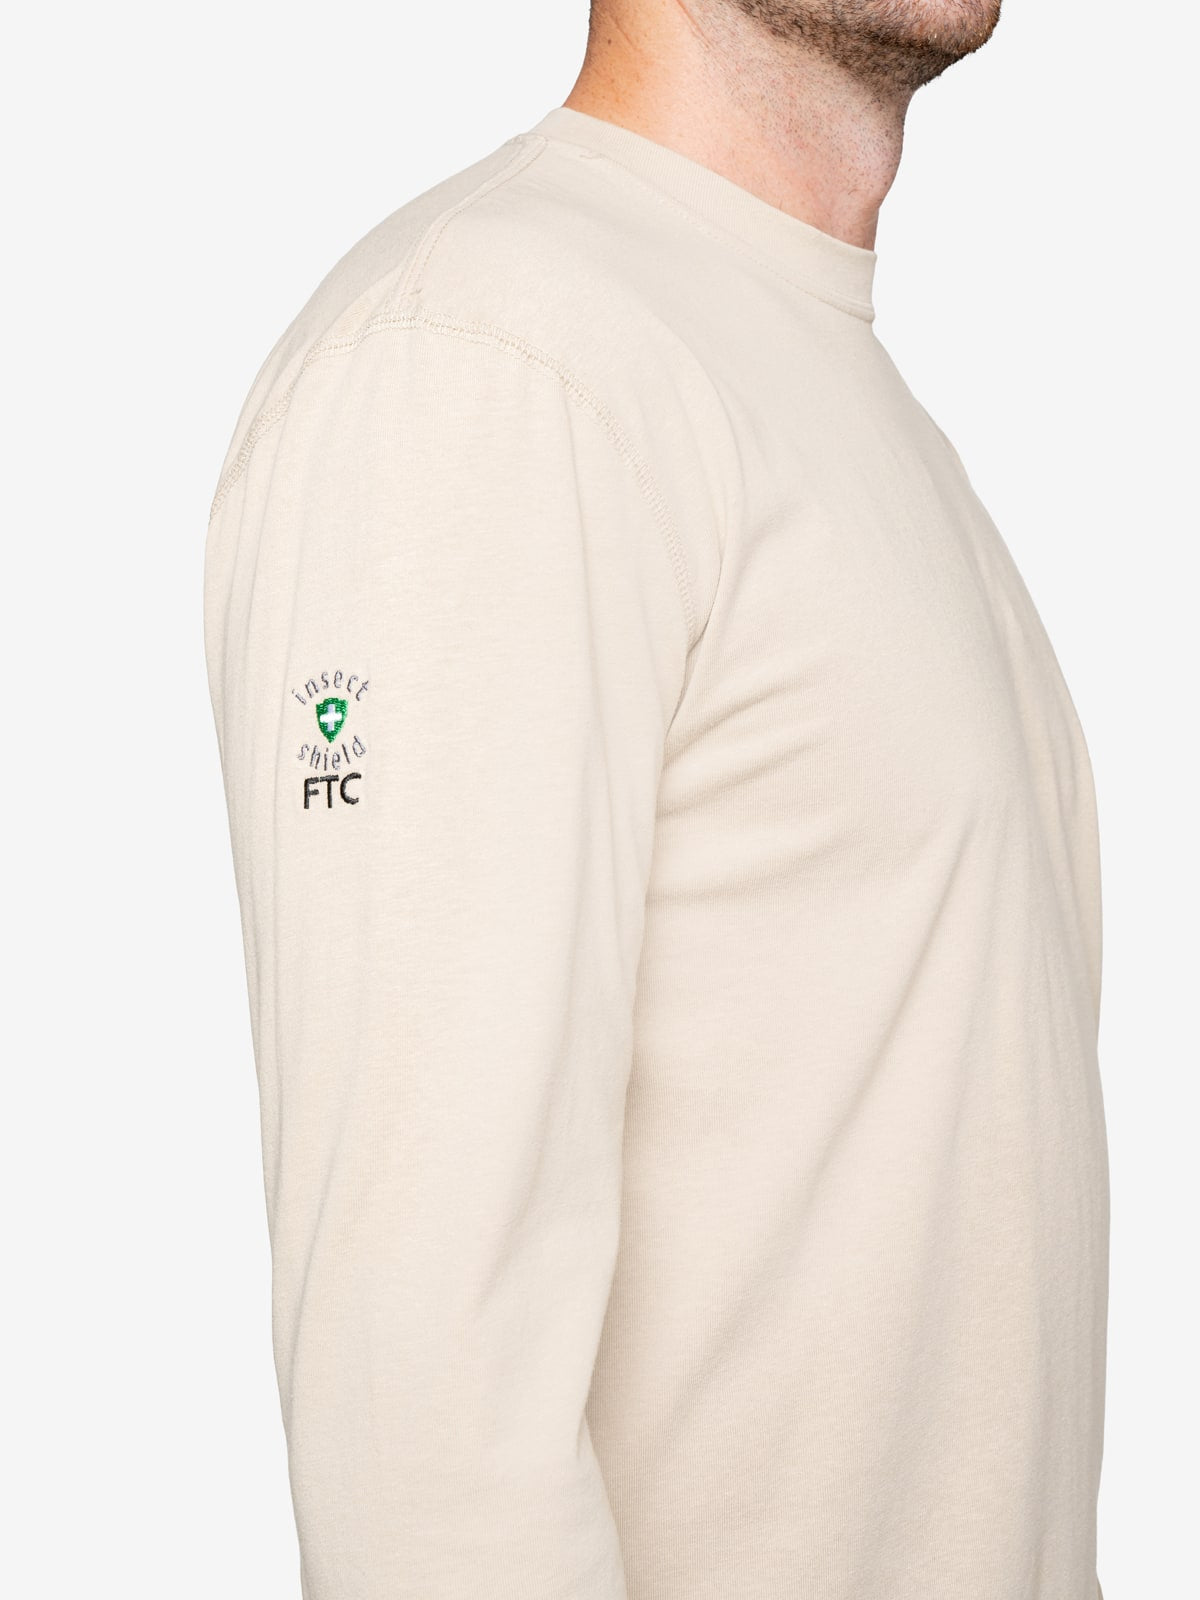 Insect Shield Men's Long Sleeve Wicking T-Shirt